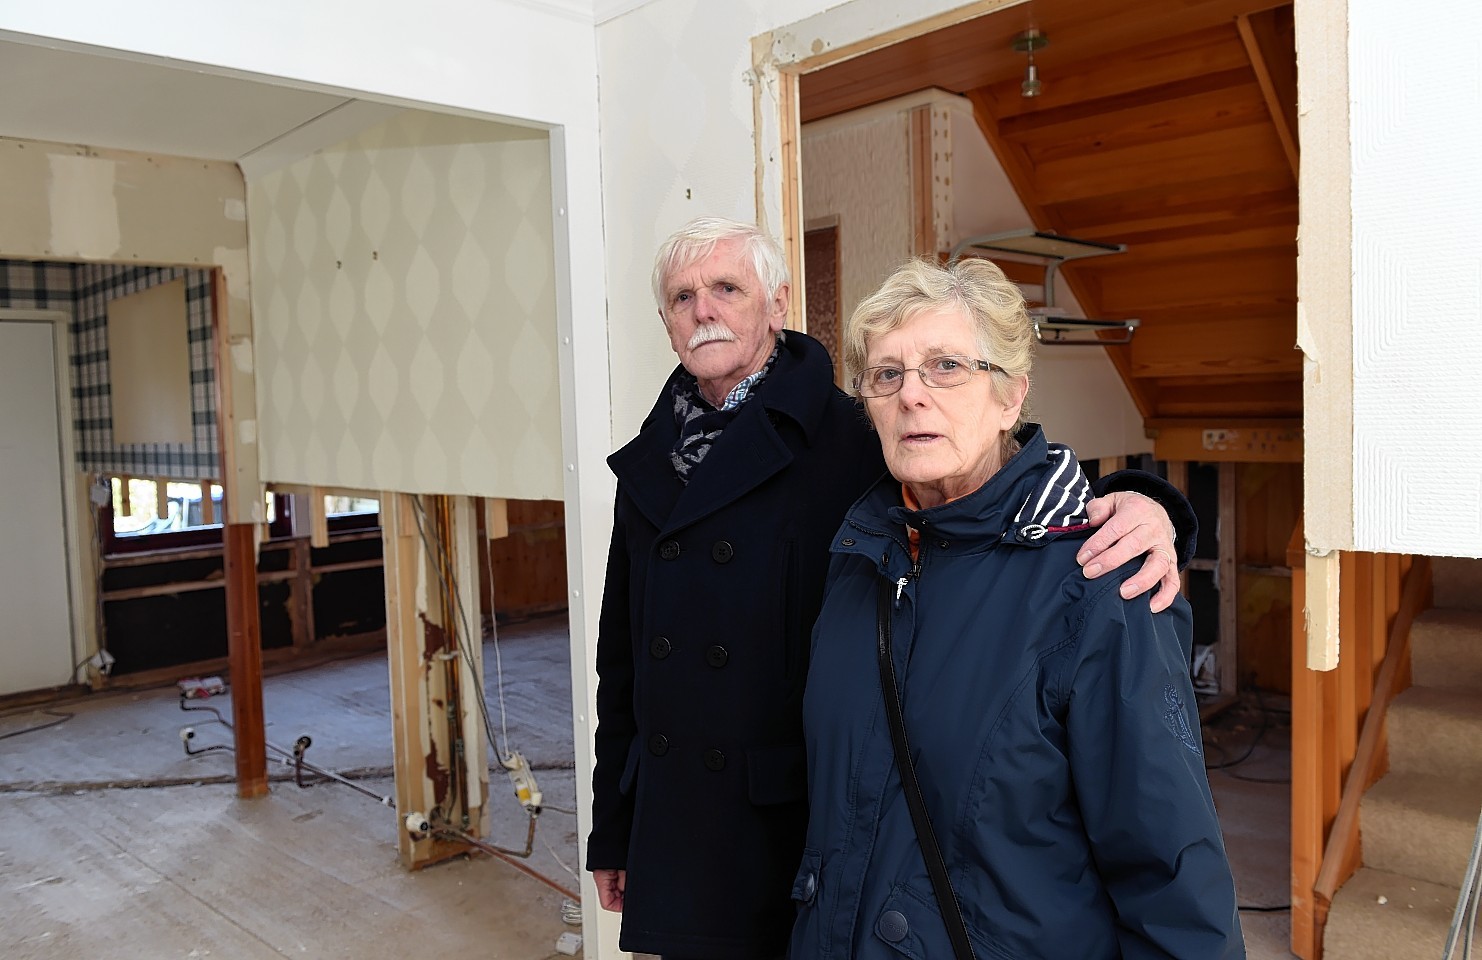 Kemnay residents Alan and Estelle Davies show damage to their home